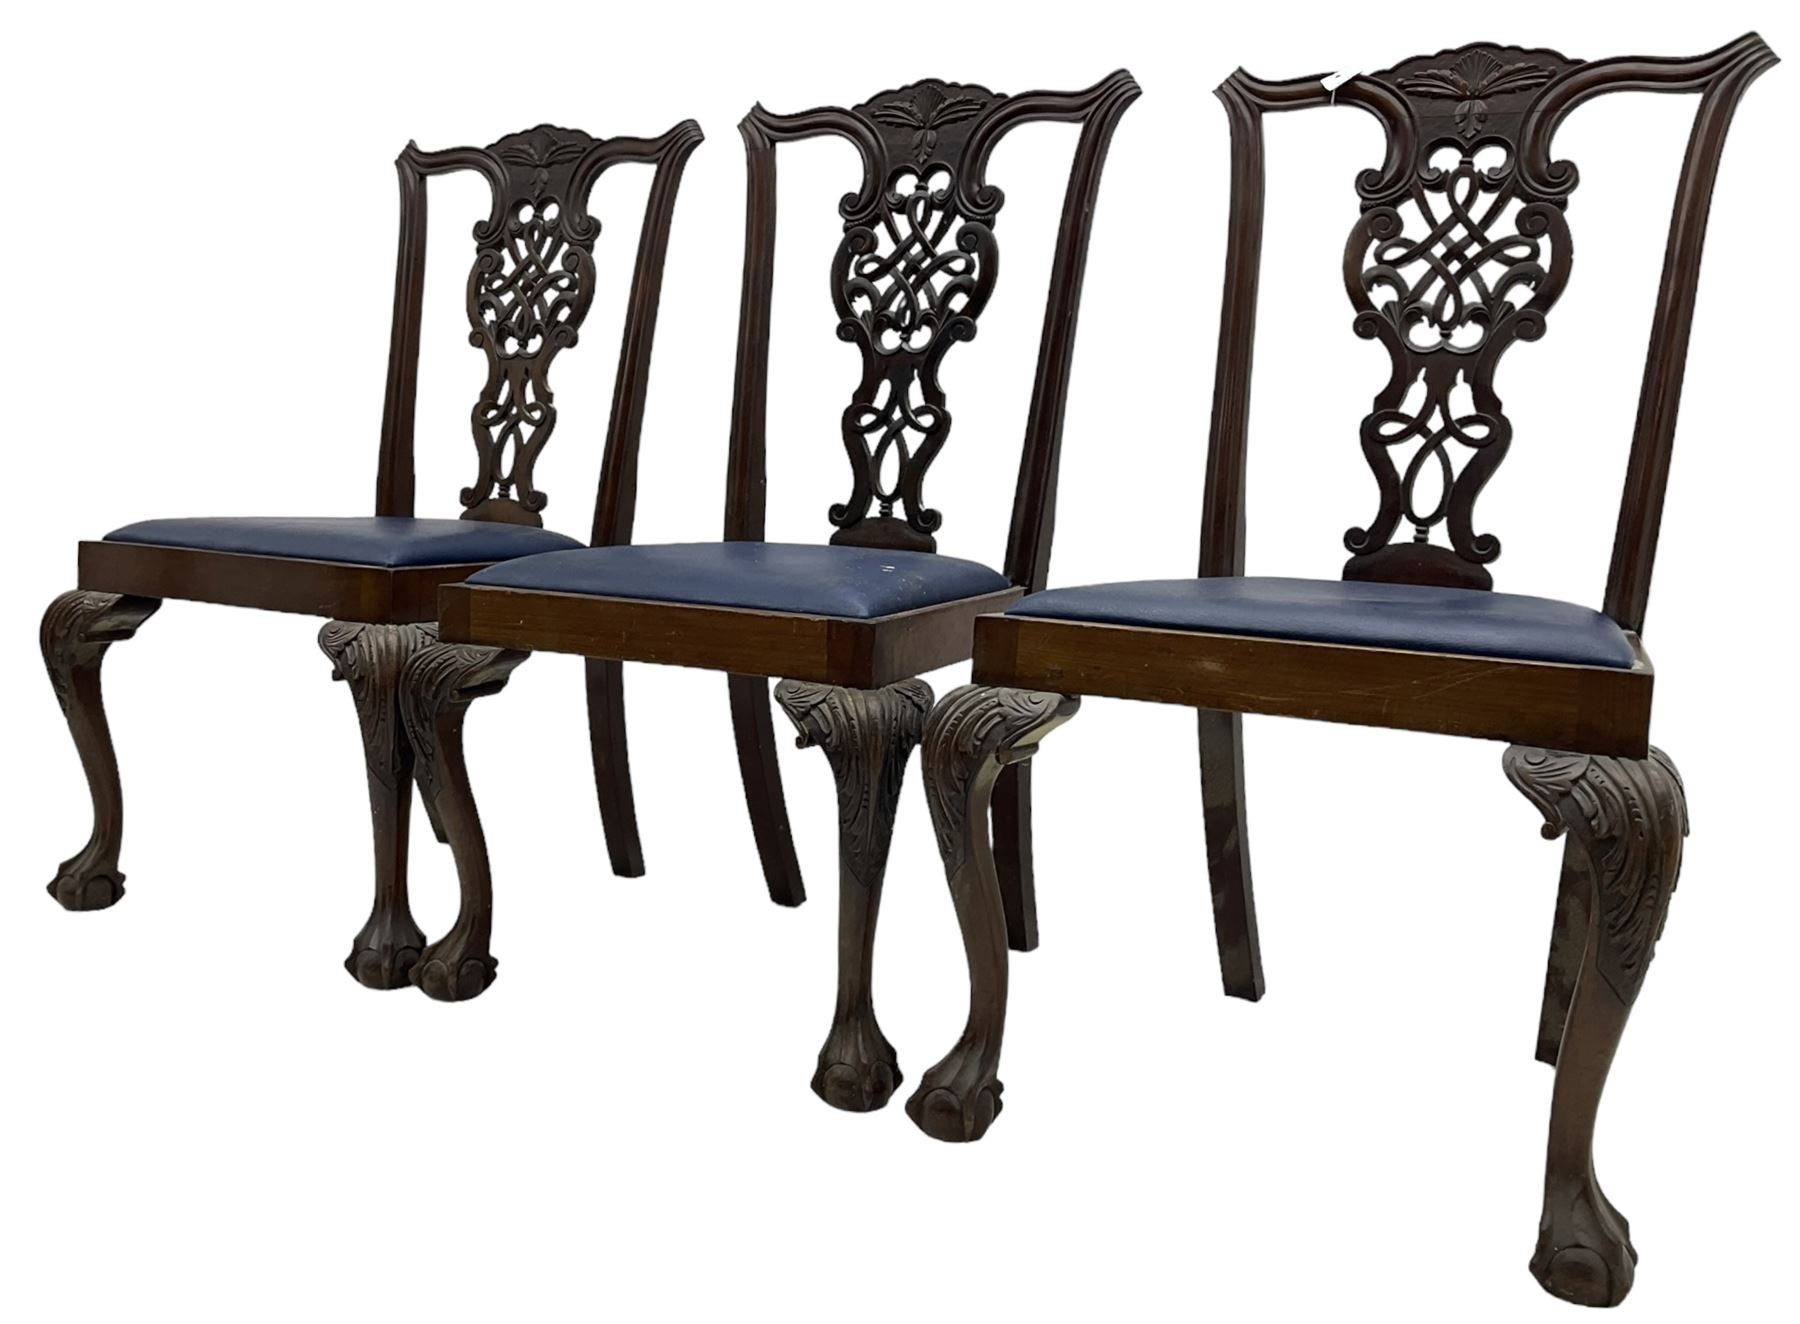 Set of six (5+1) Chippendale design mahogany dining chairs - Image 7 of 8